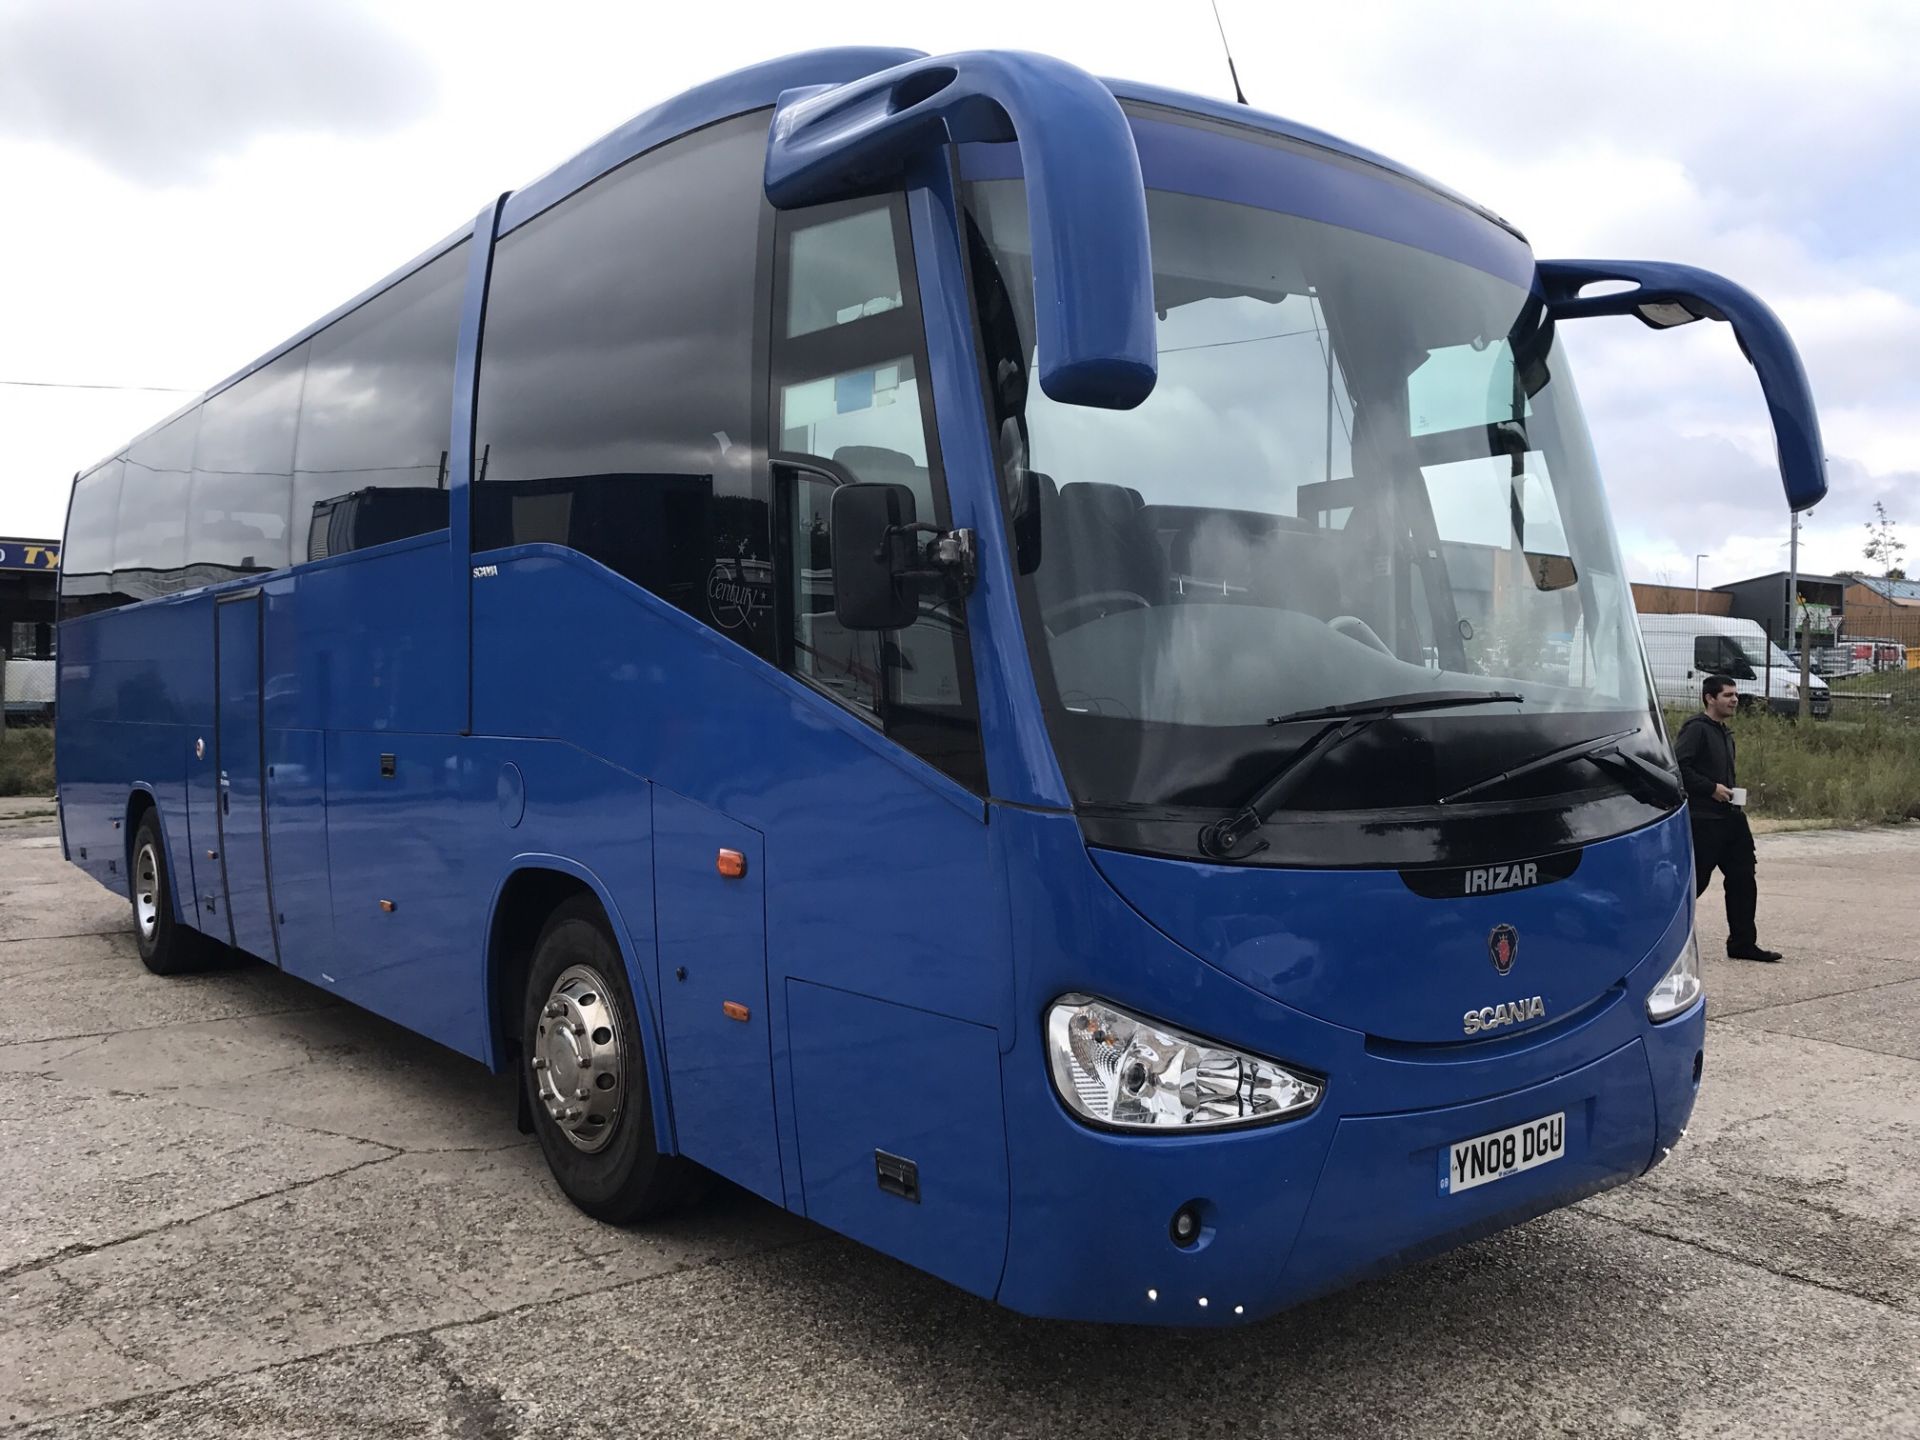 2008 SCANIA IRIZAR 49 SEATER COACH WITH TOILET - Image 8 of 25